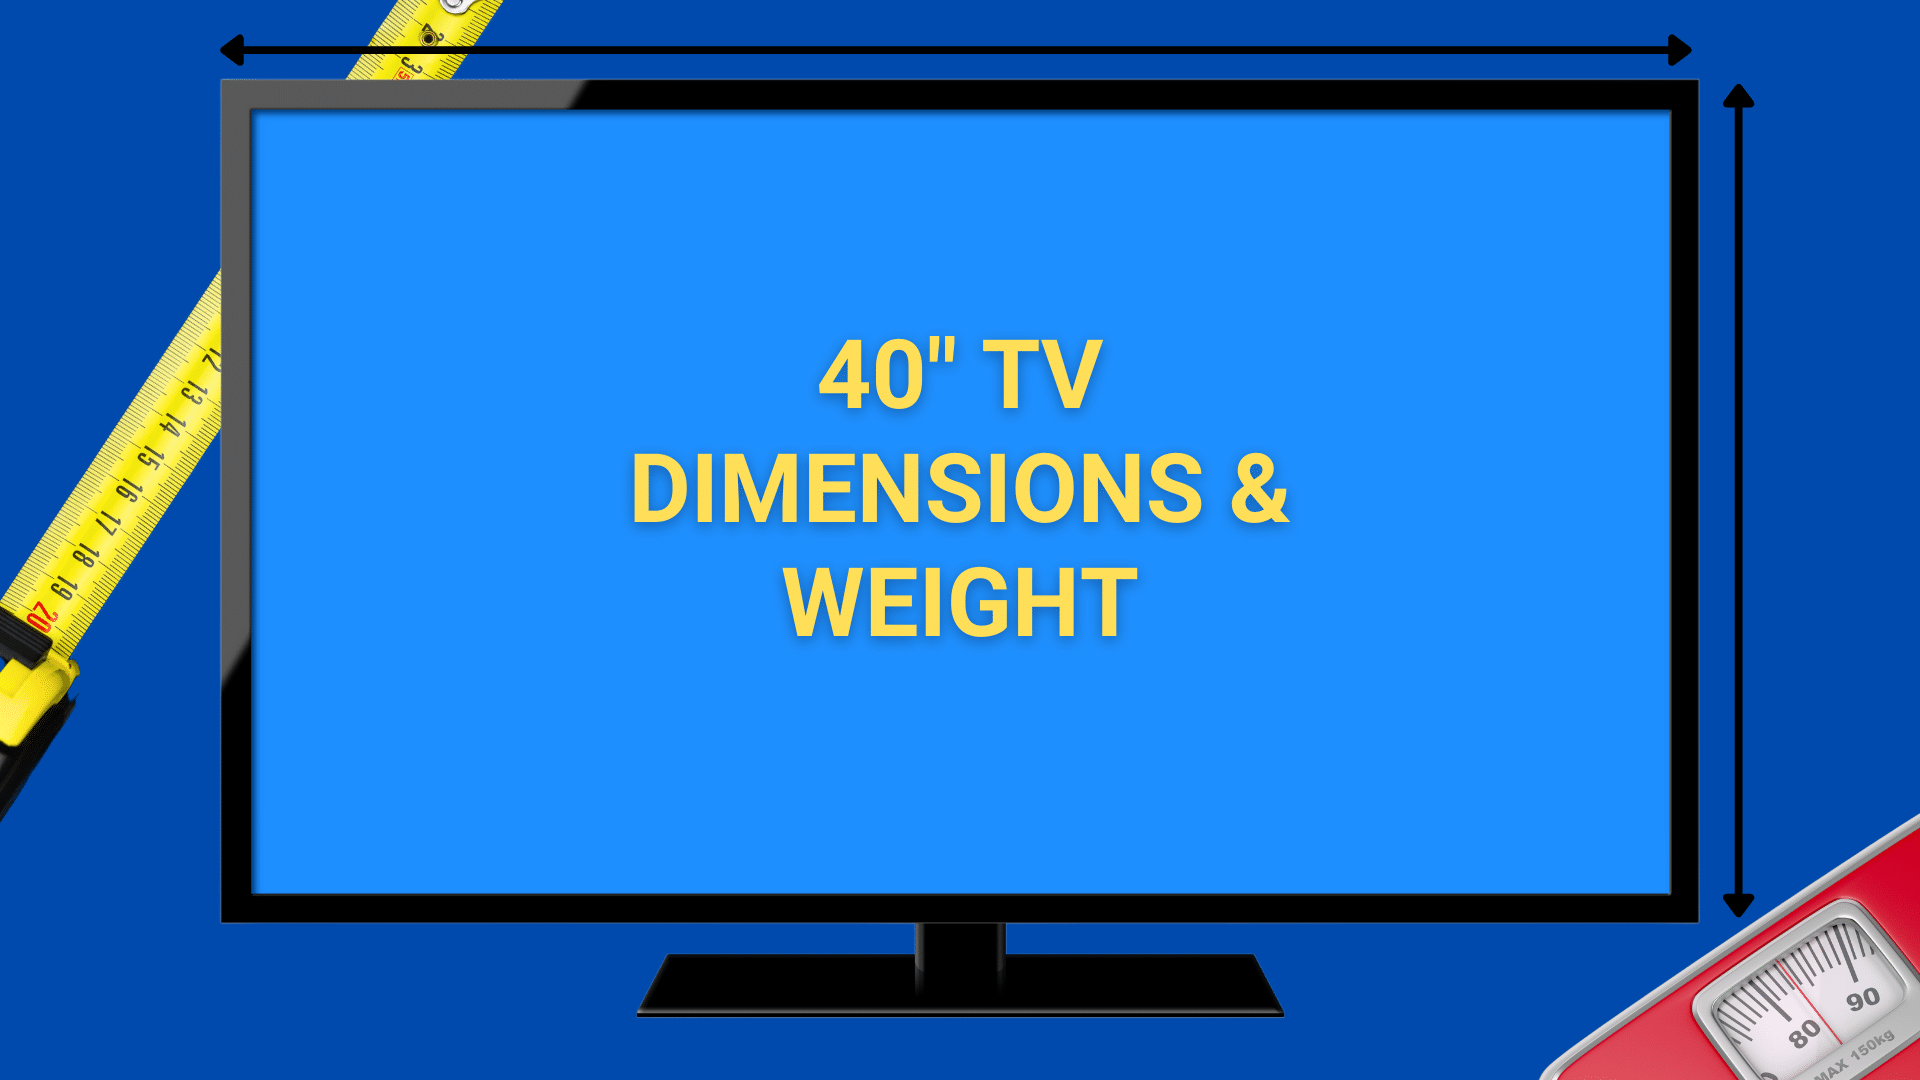 Image of 40 inch TV with measuring tape and bath scale in background.